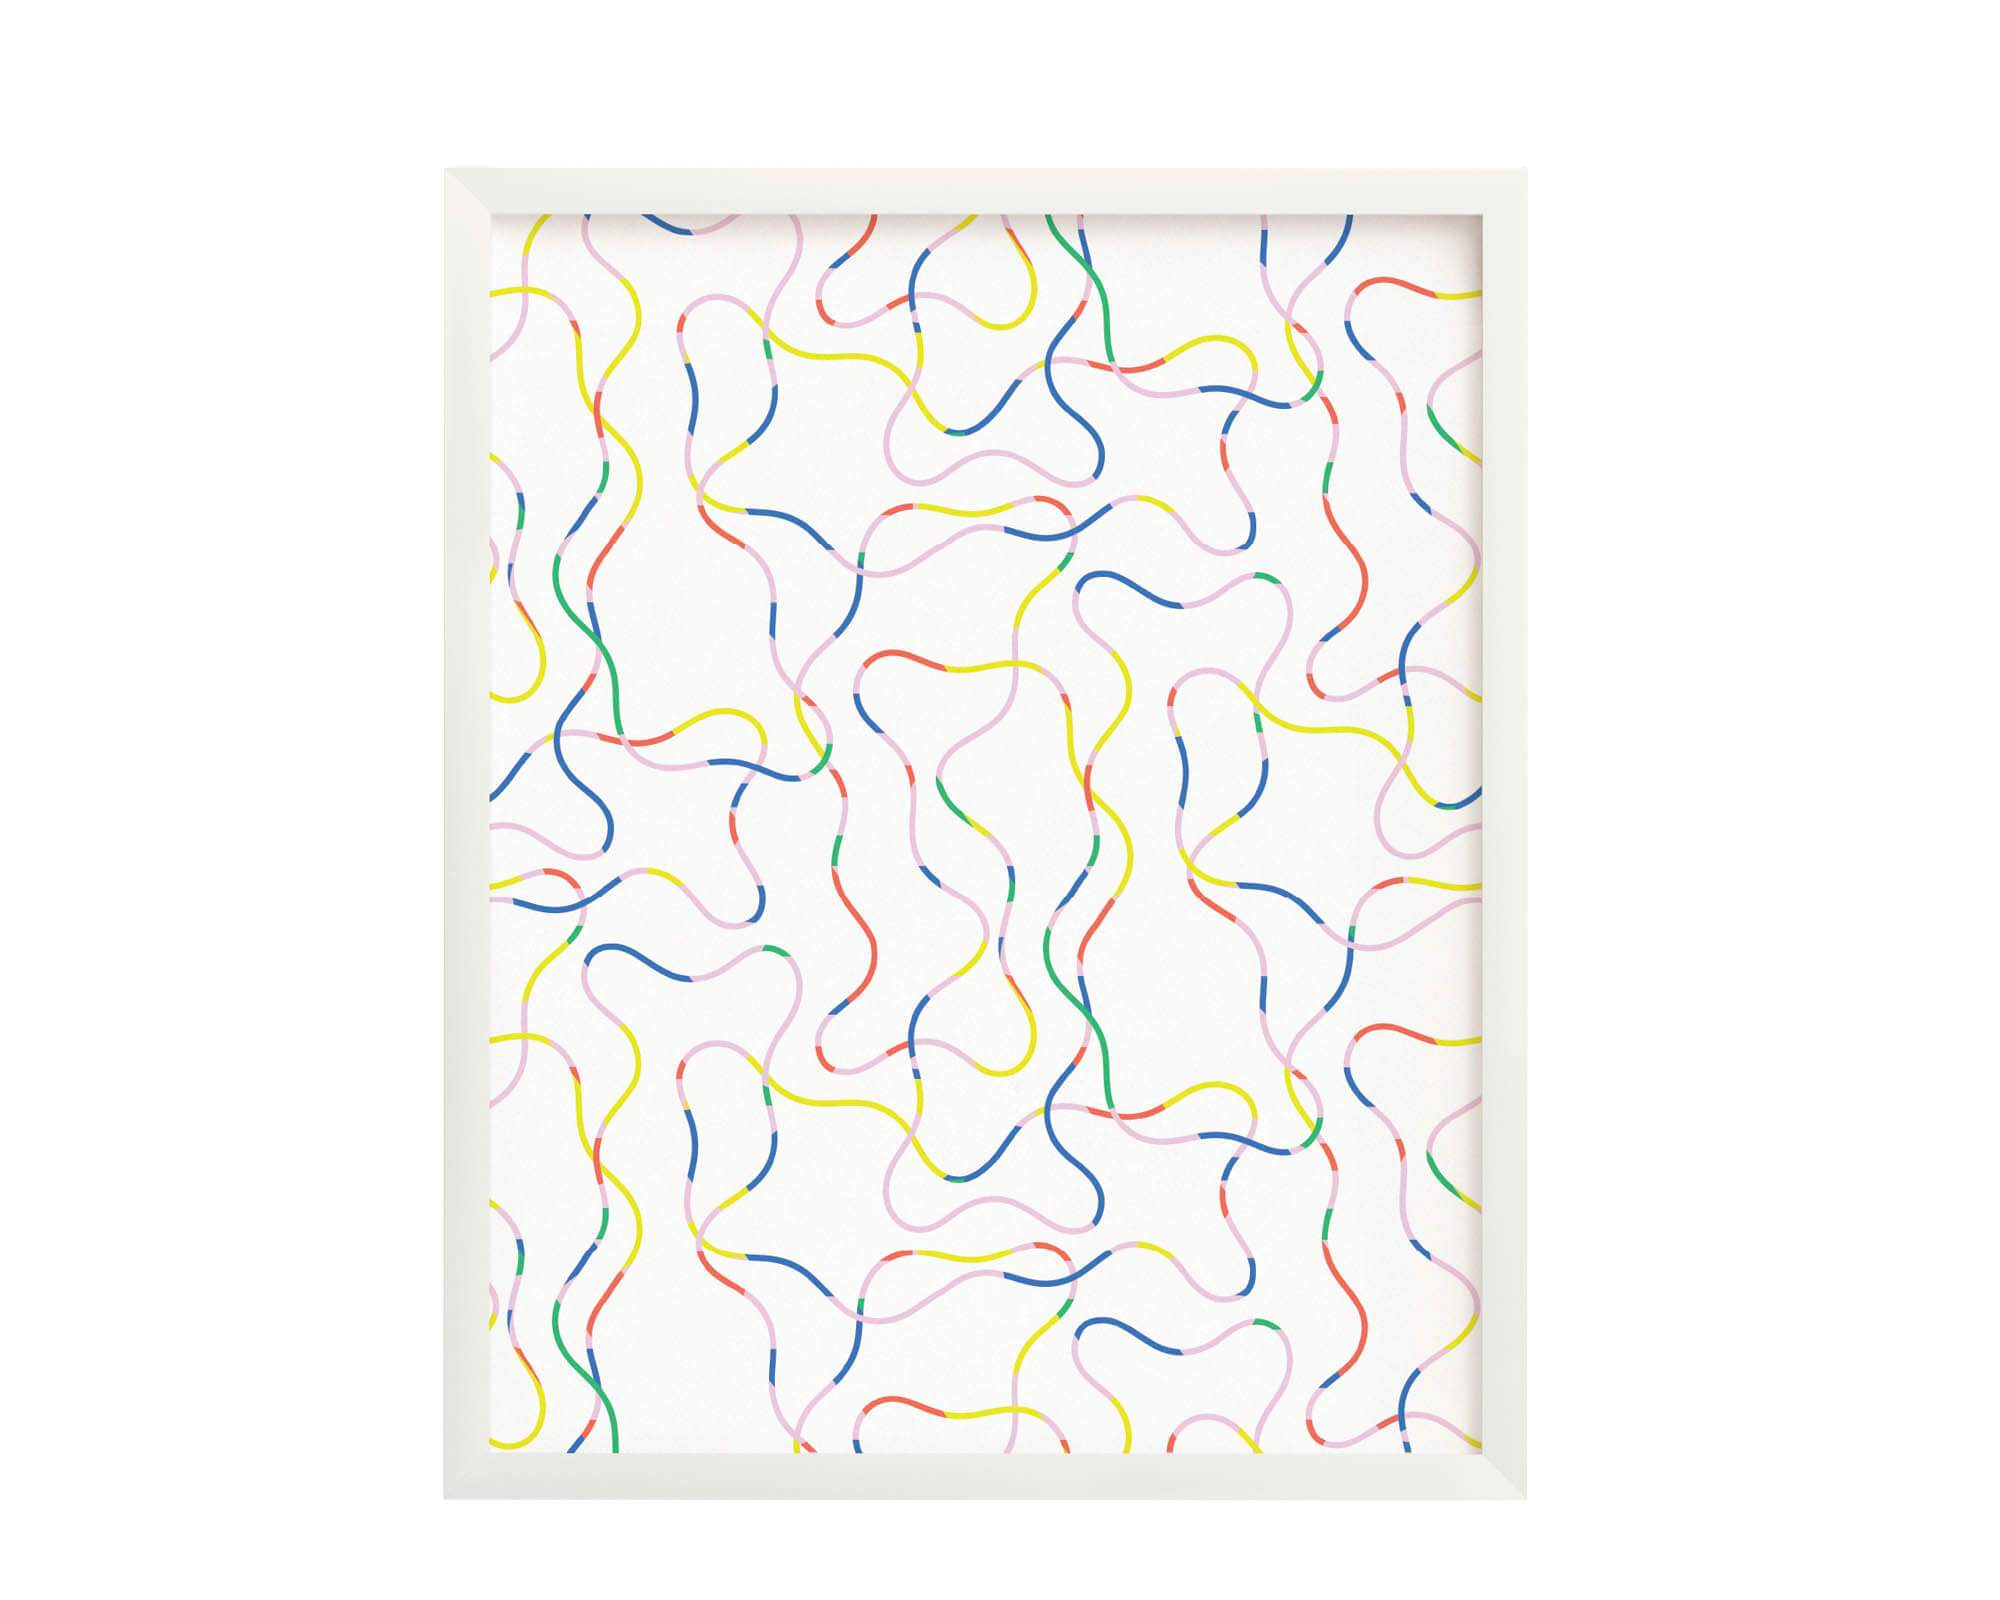 "Magic Pencil" graphic colorful rainbow squiggle pattern archival giclée modern art print. Made in USA by My Darlin' @mydarlin_bk